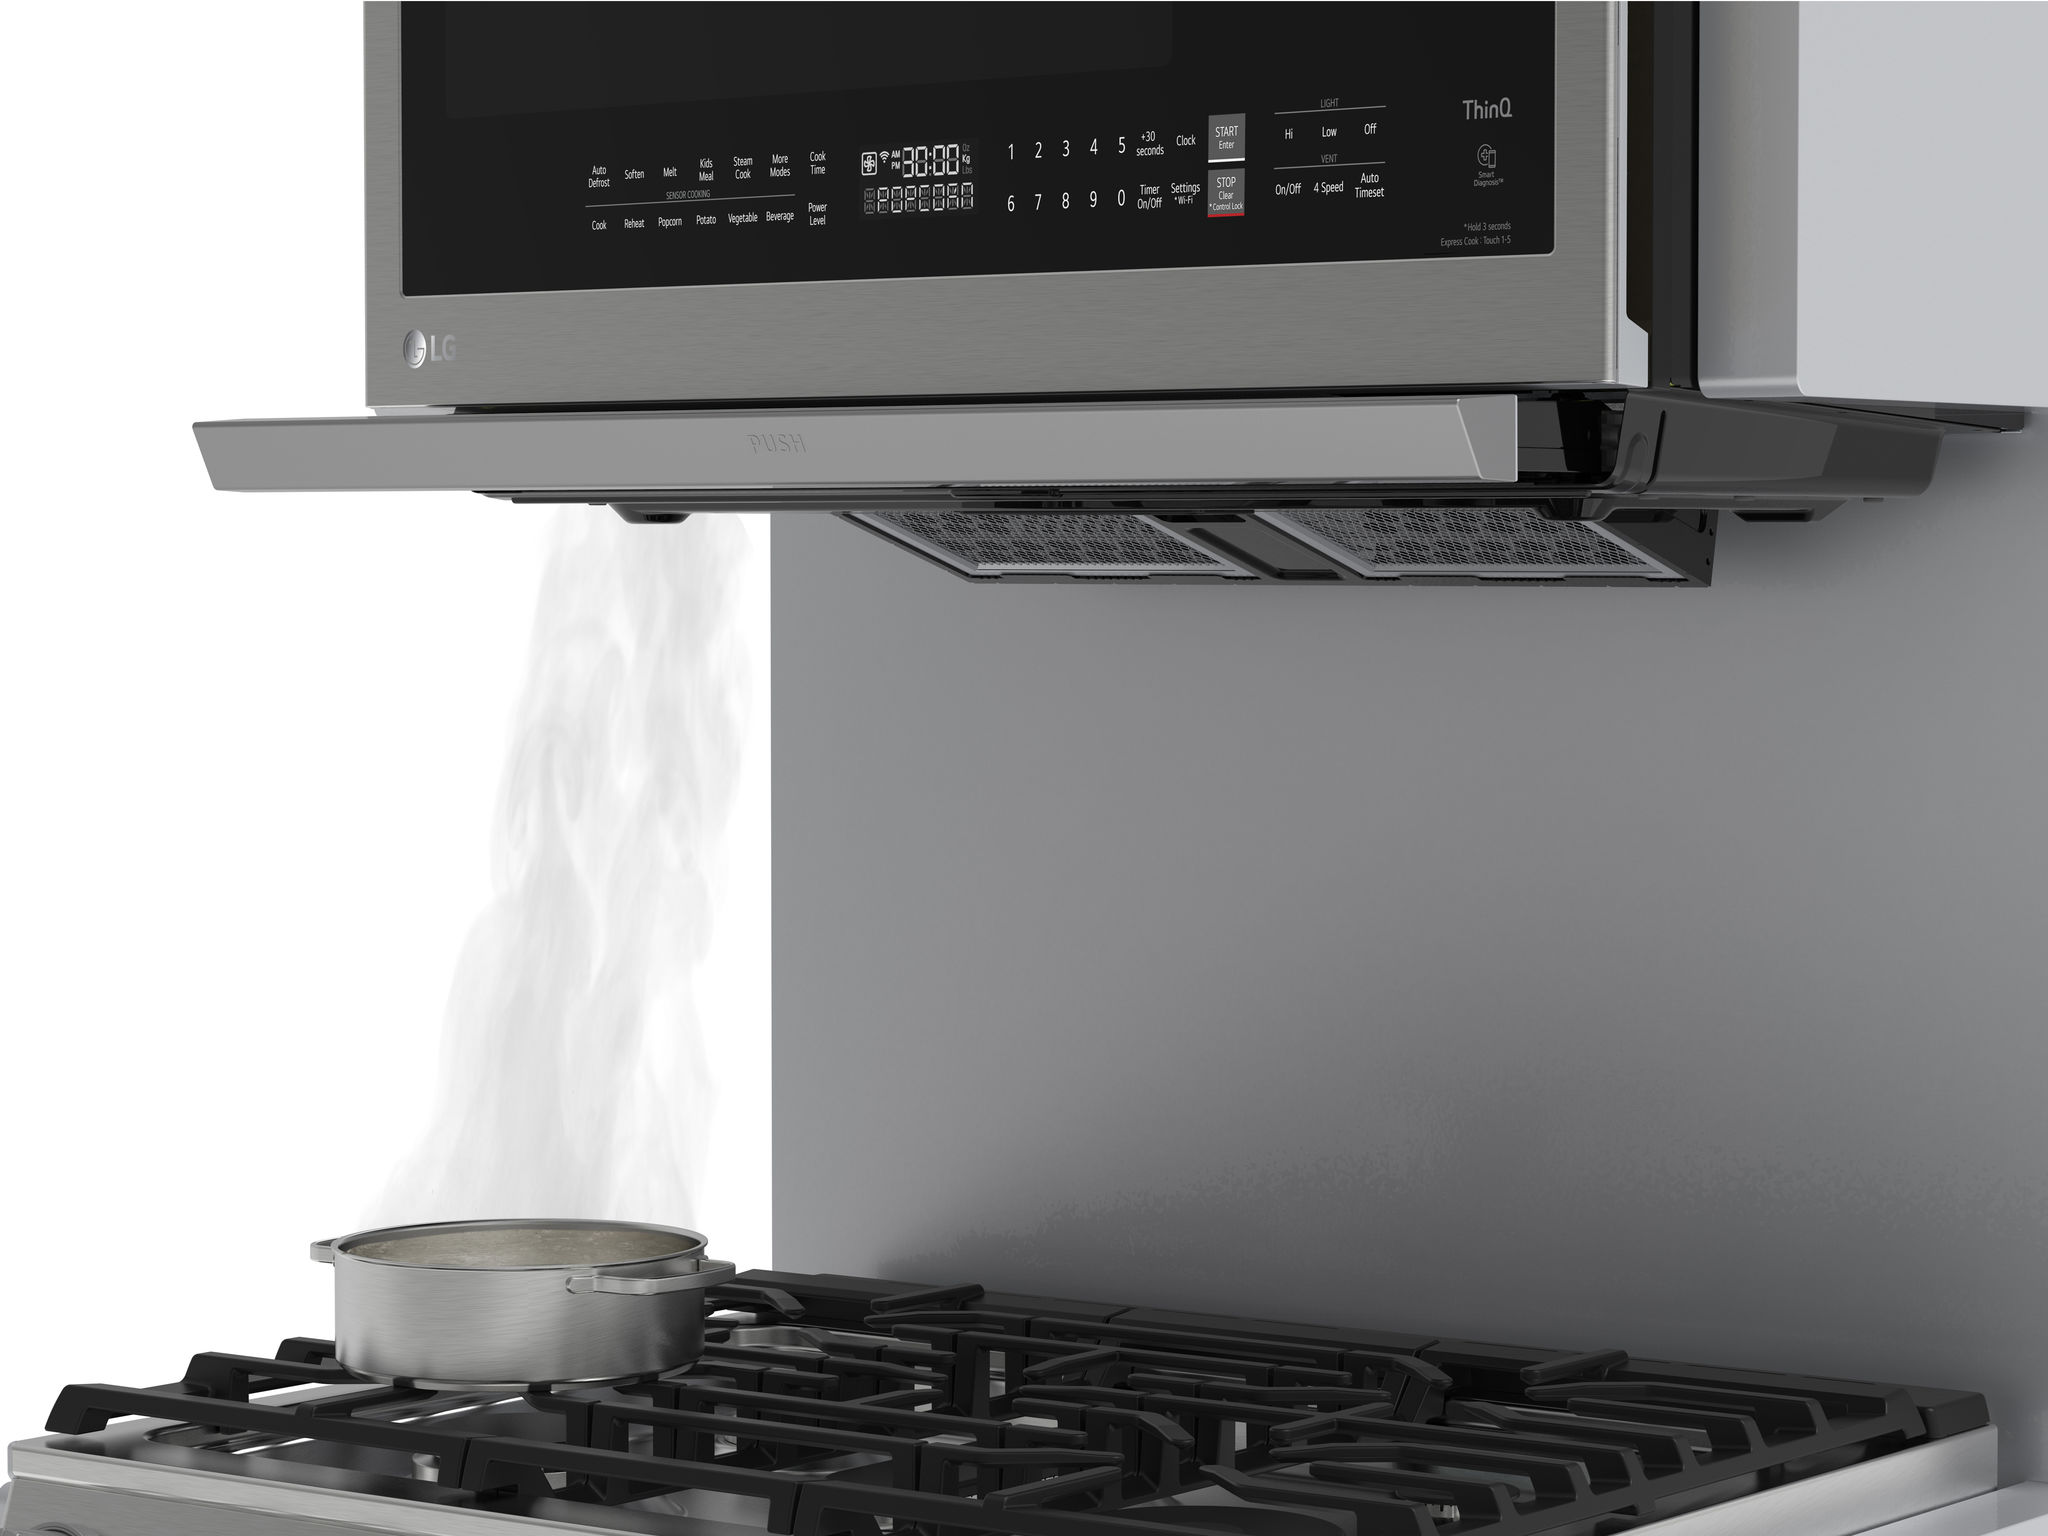 LG STUDIO Convection OTR with Air Fry